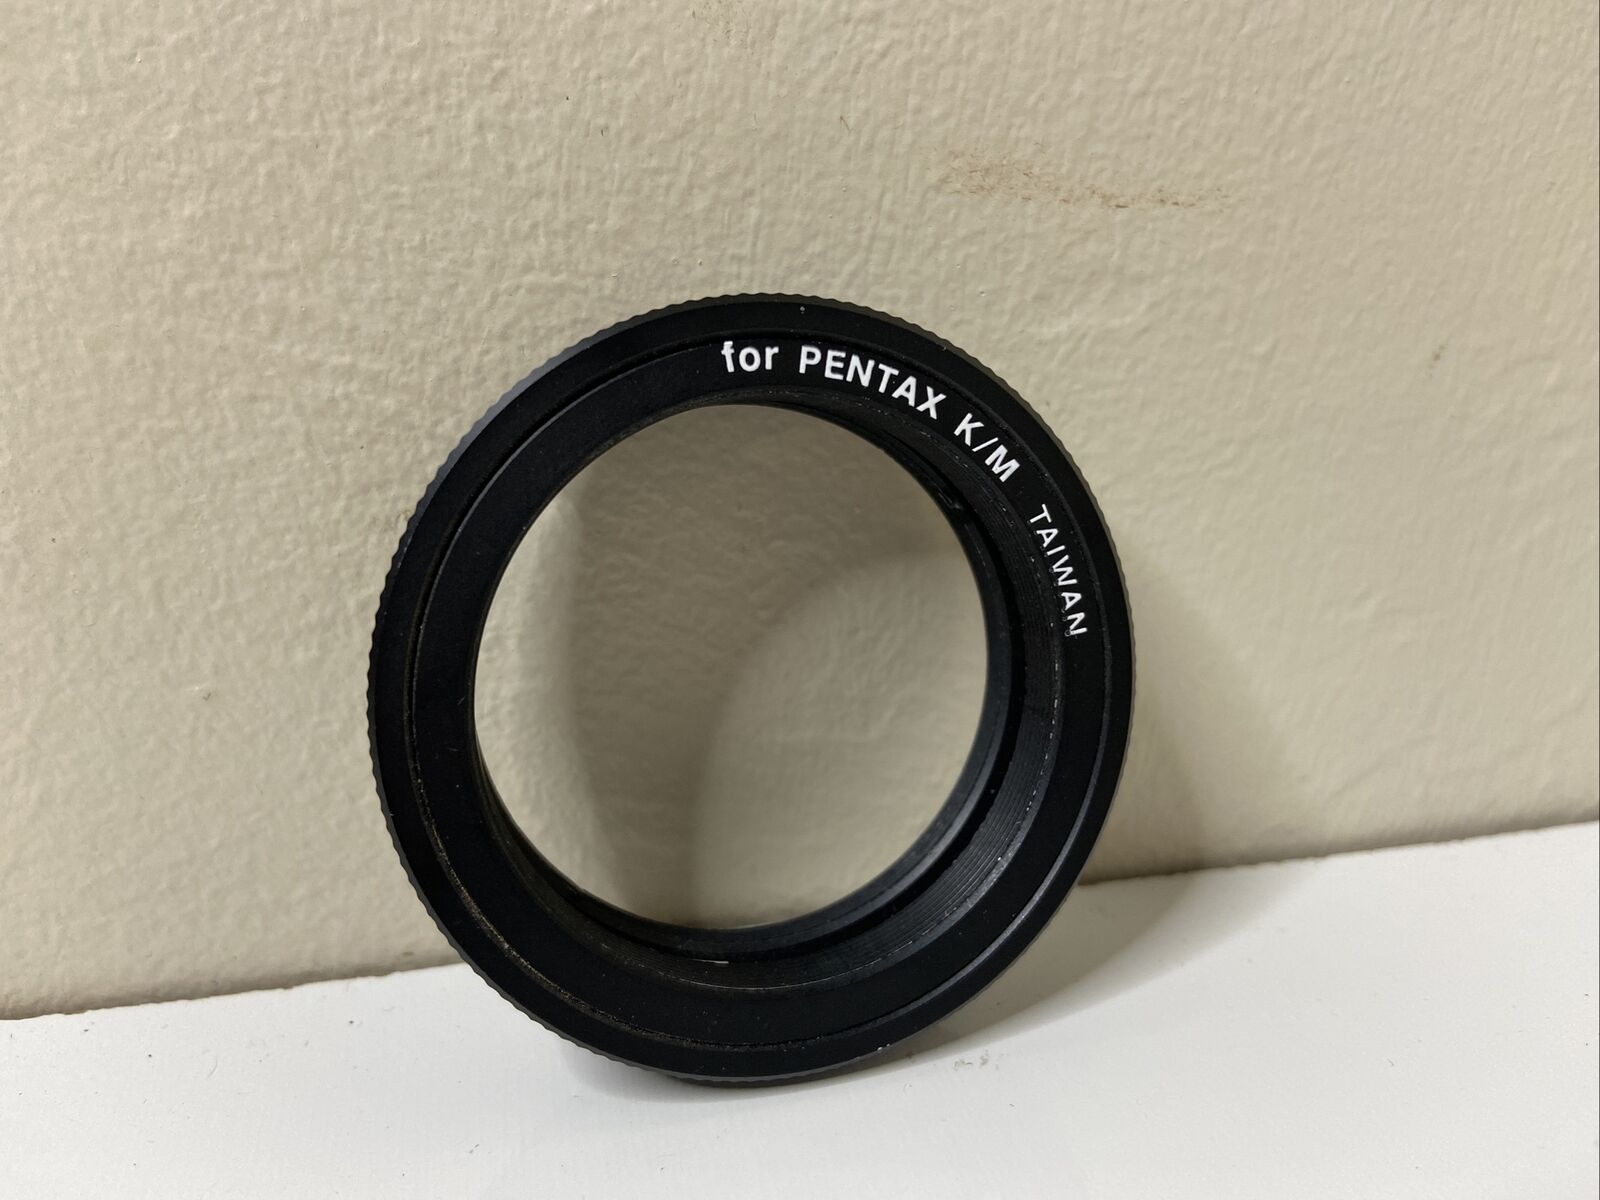 Celestron 93403 T-ring For Pentax K  M Camera Attachment 35mm